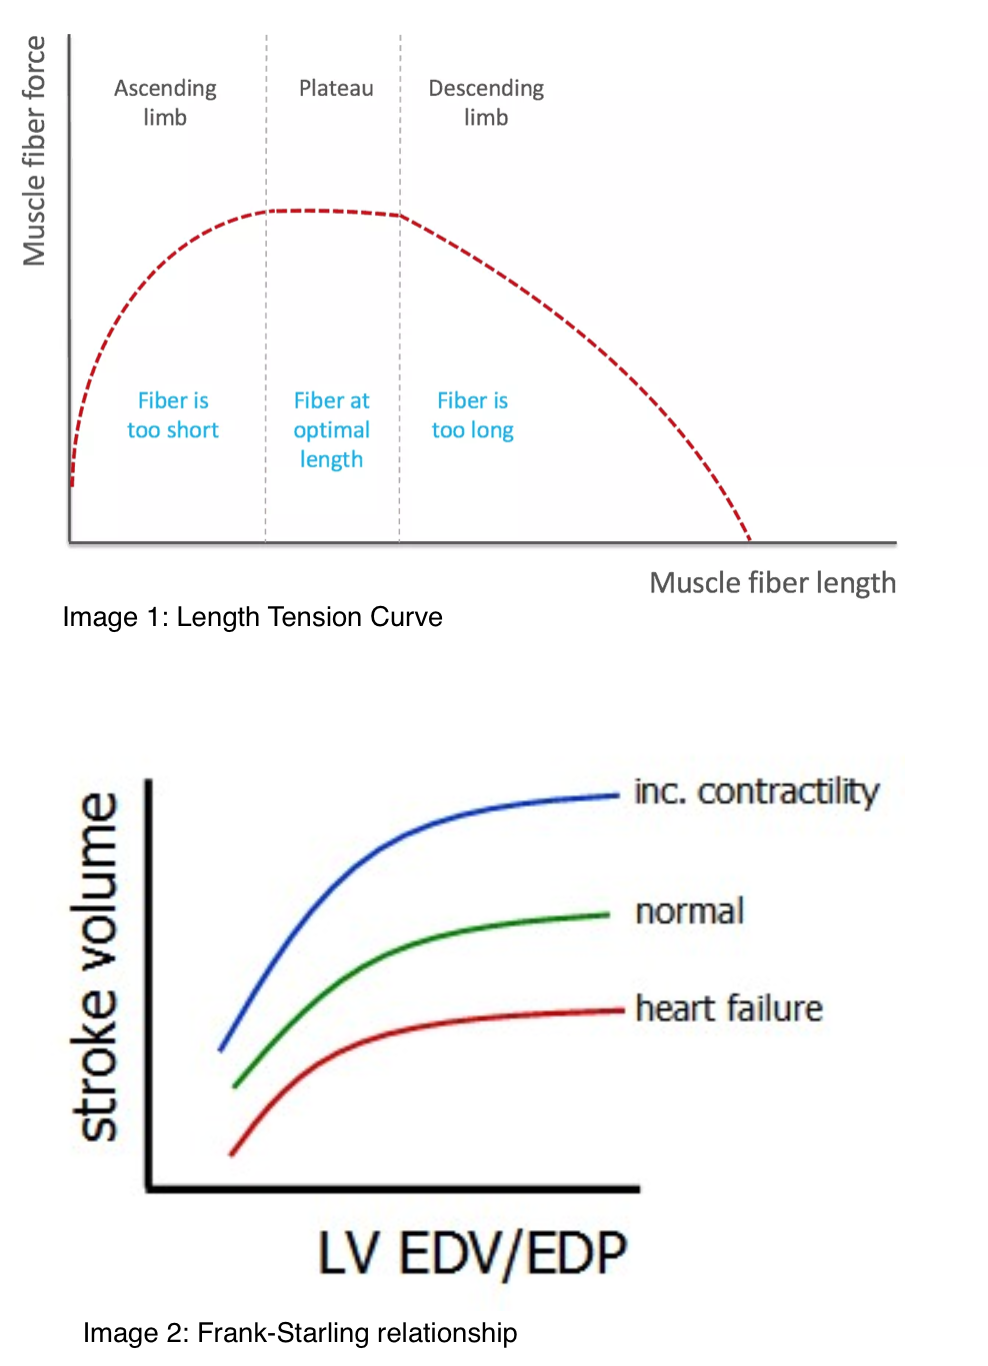 Frank-Starling relationship and length tension curve